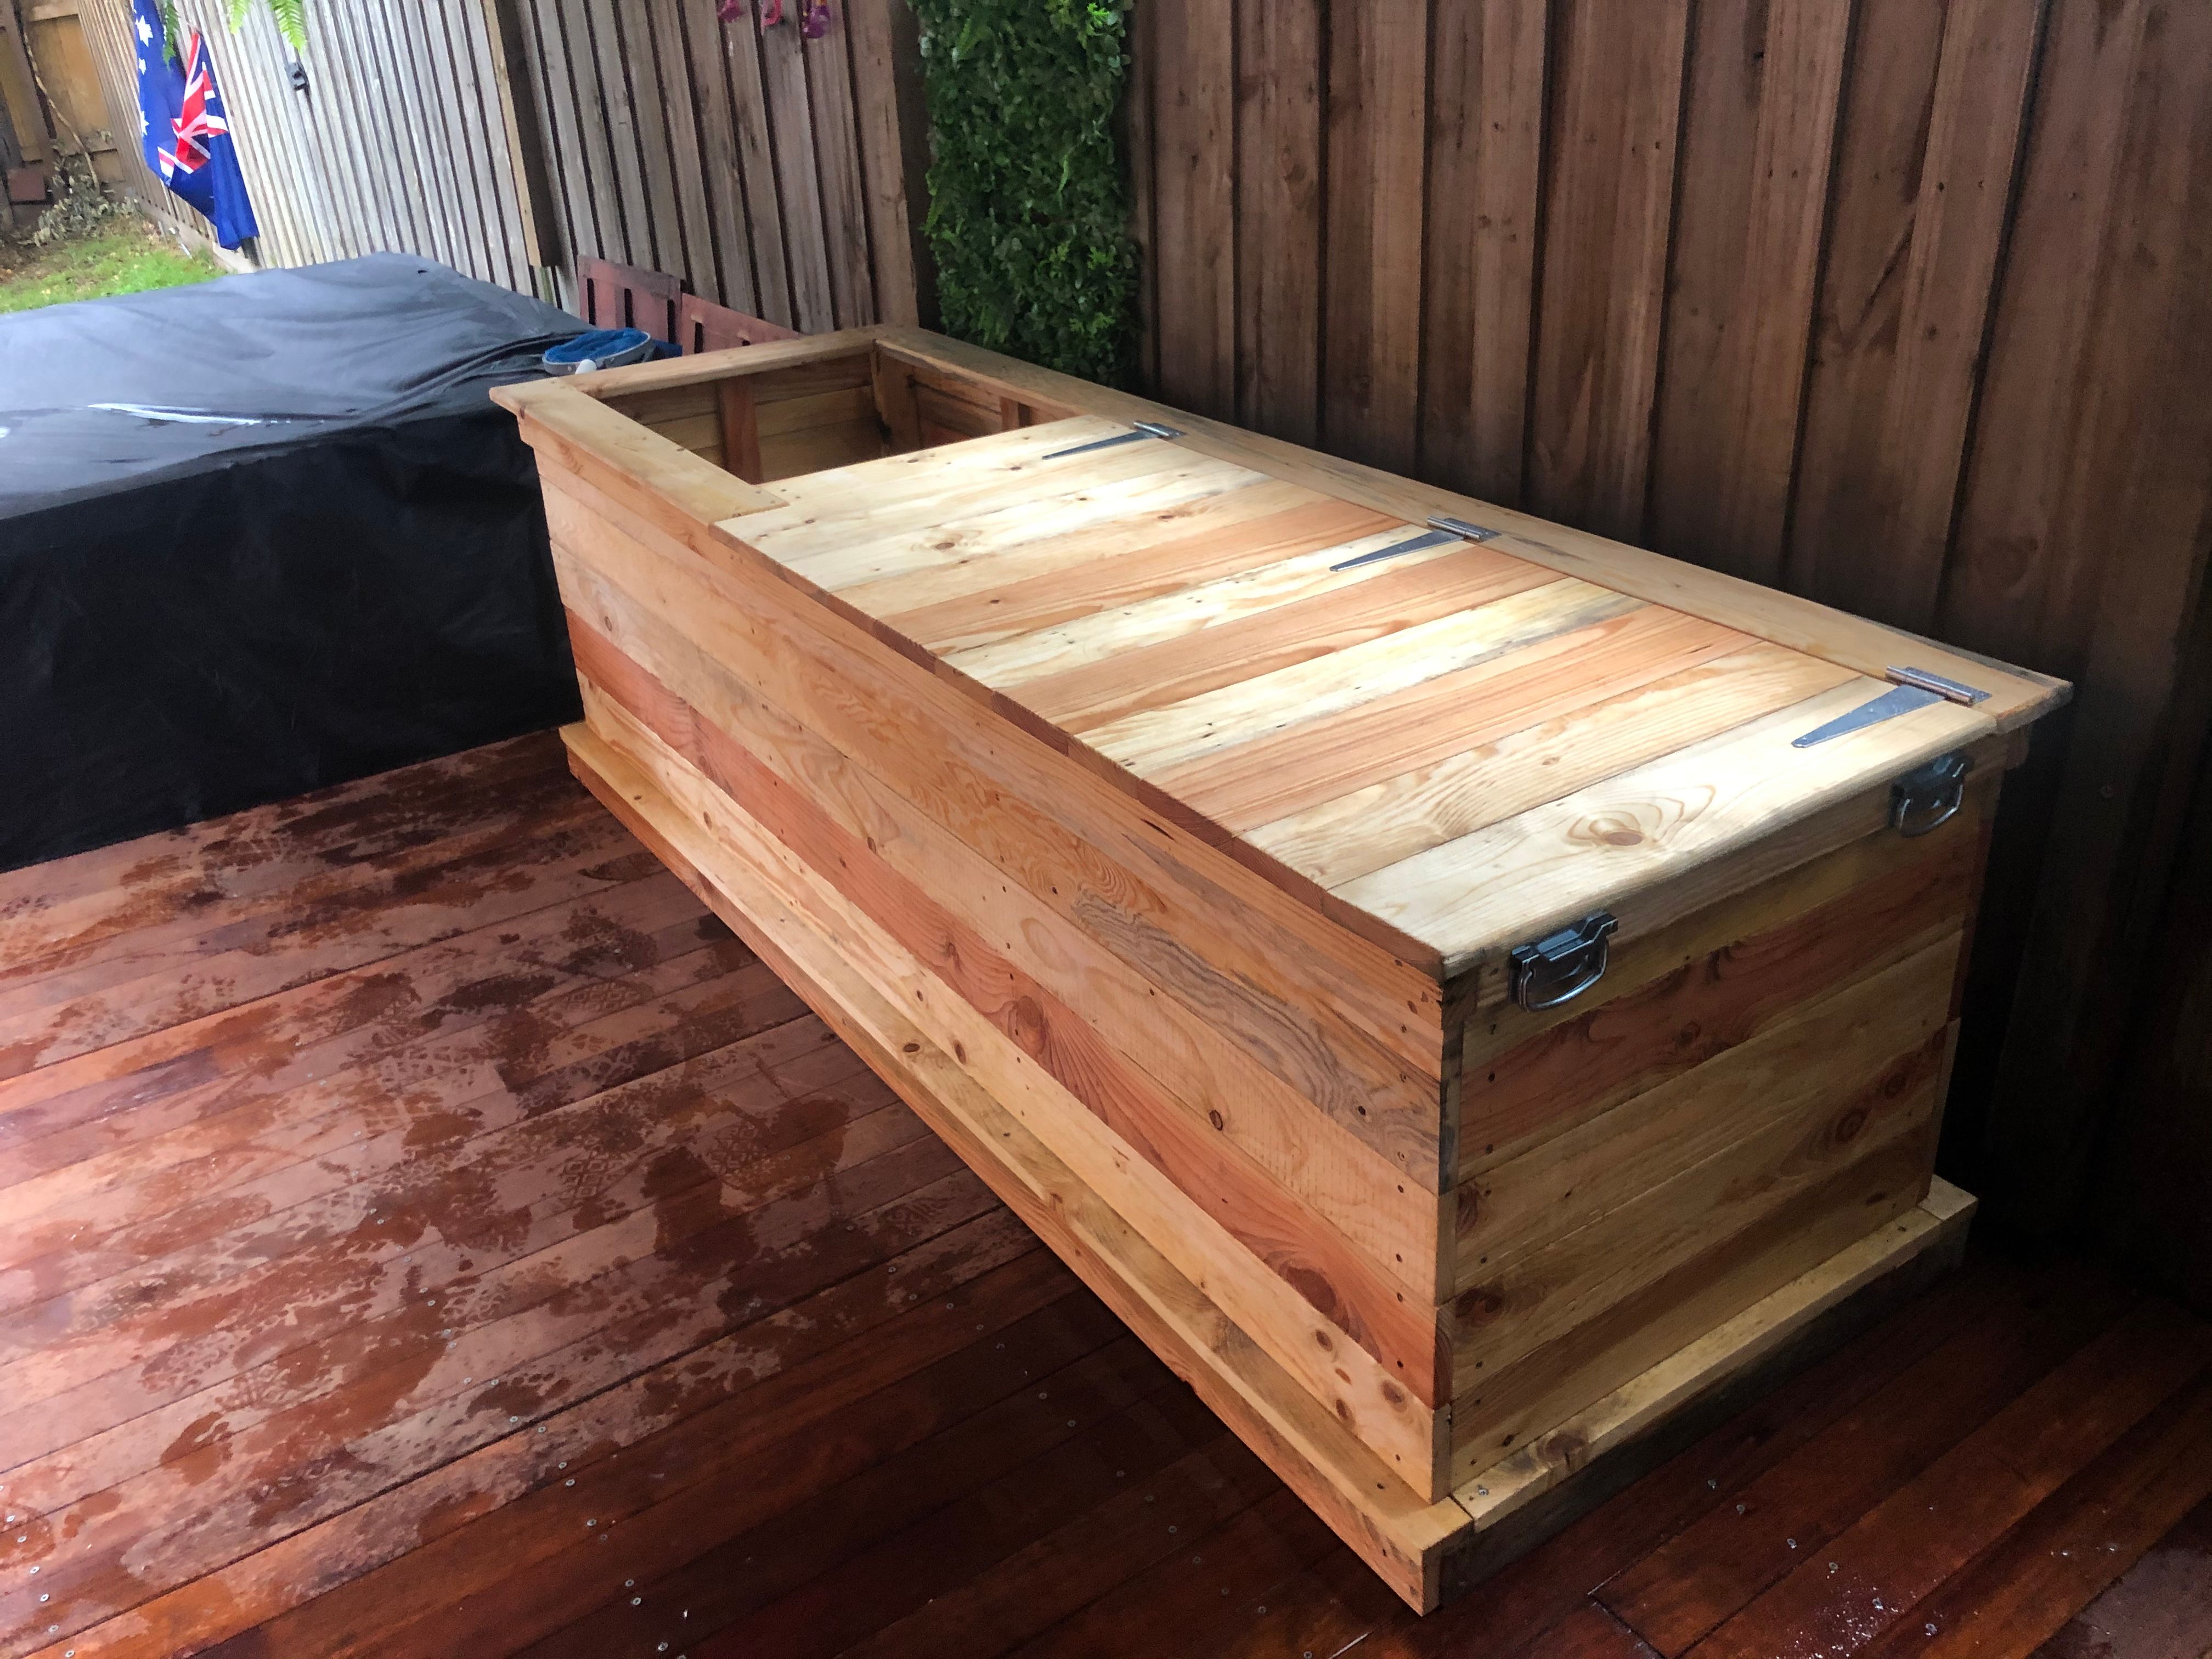 Bench Seat With Storage And Planter Box, Outdoor Bench Seat With Storage Bunnings